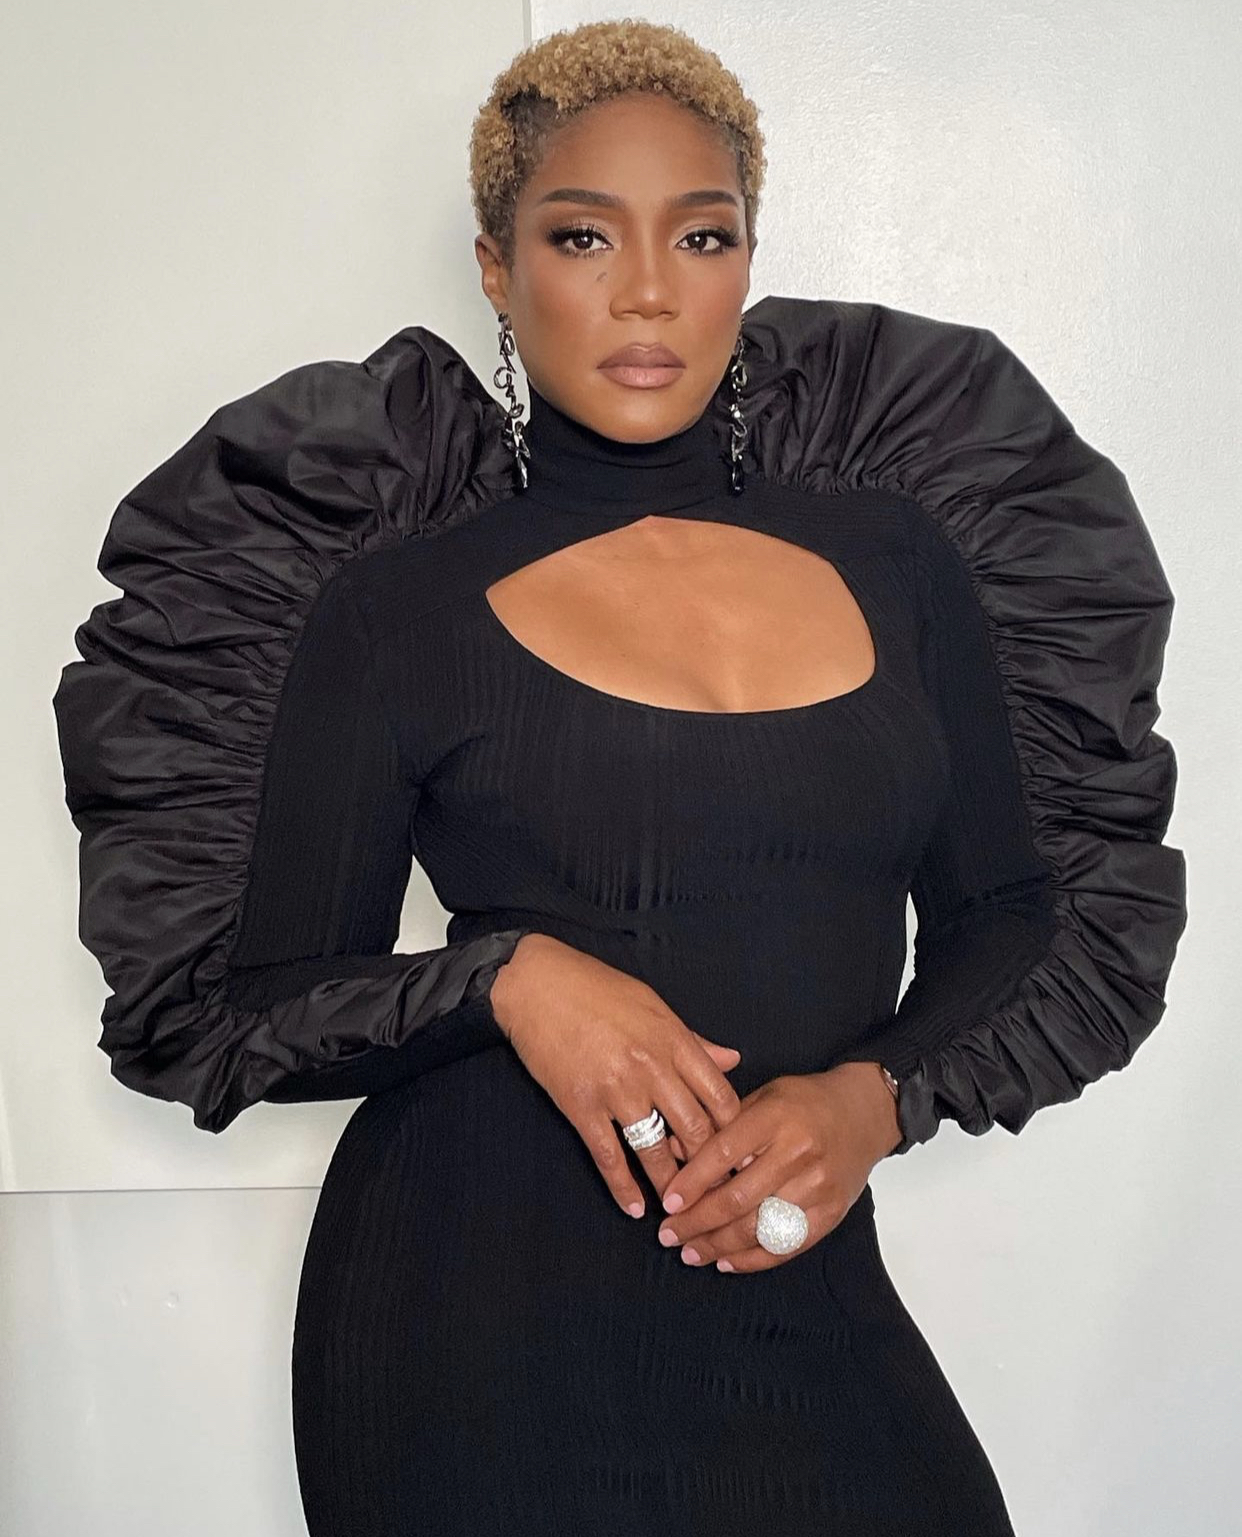 tiffany-haddish-wears-herve-leger-re20-where-friday-night-vibes-styled-by-luxurylaw